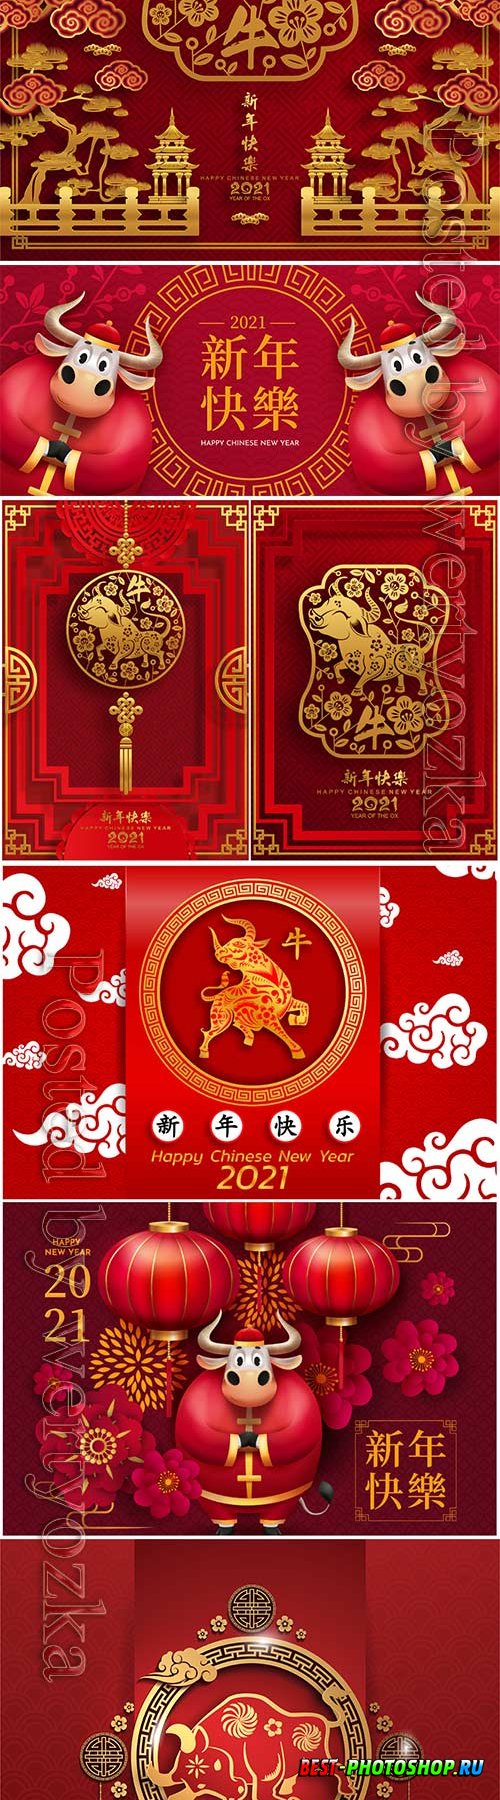 Happy chinese new year 2021 vector